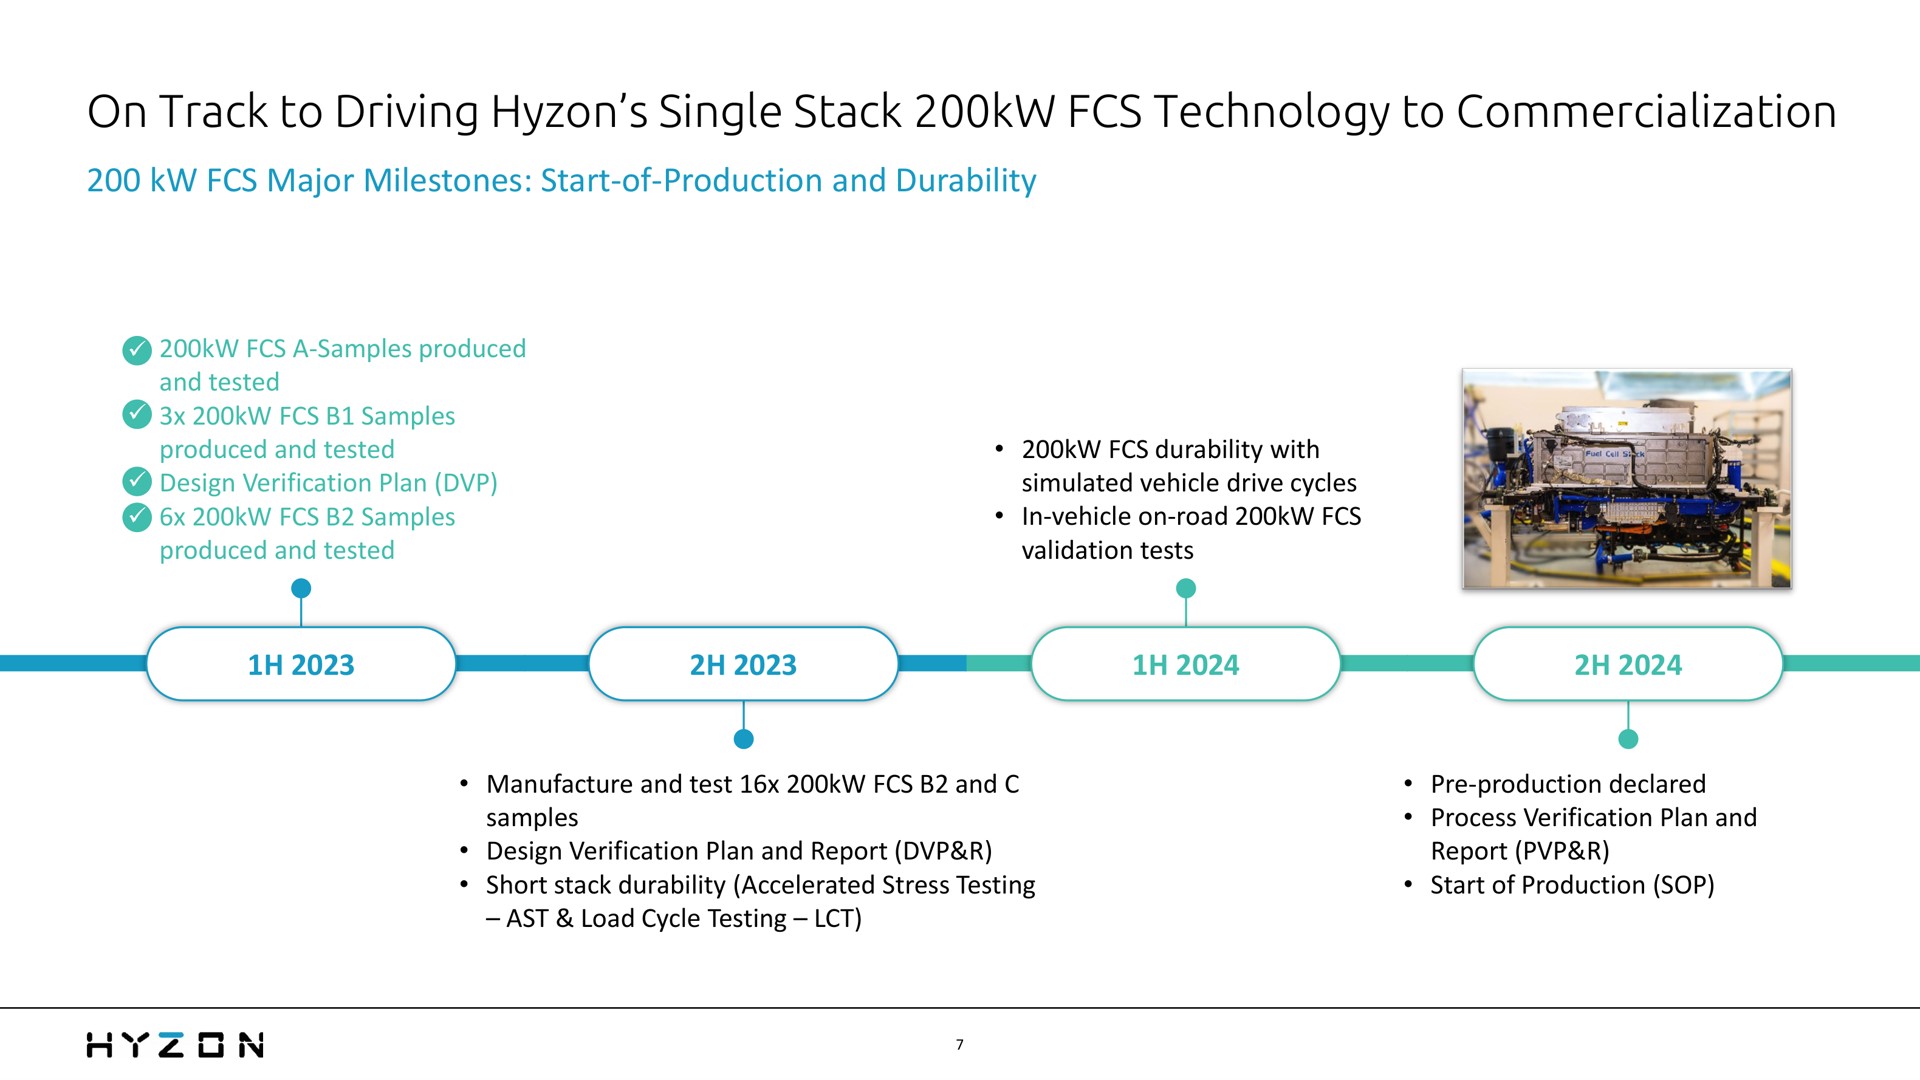 on track to driving single stack technology to commercialization | Hyzon